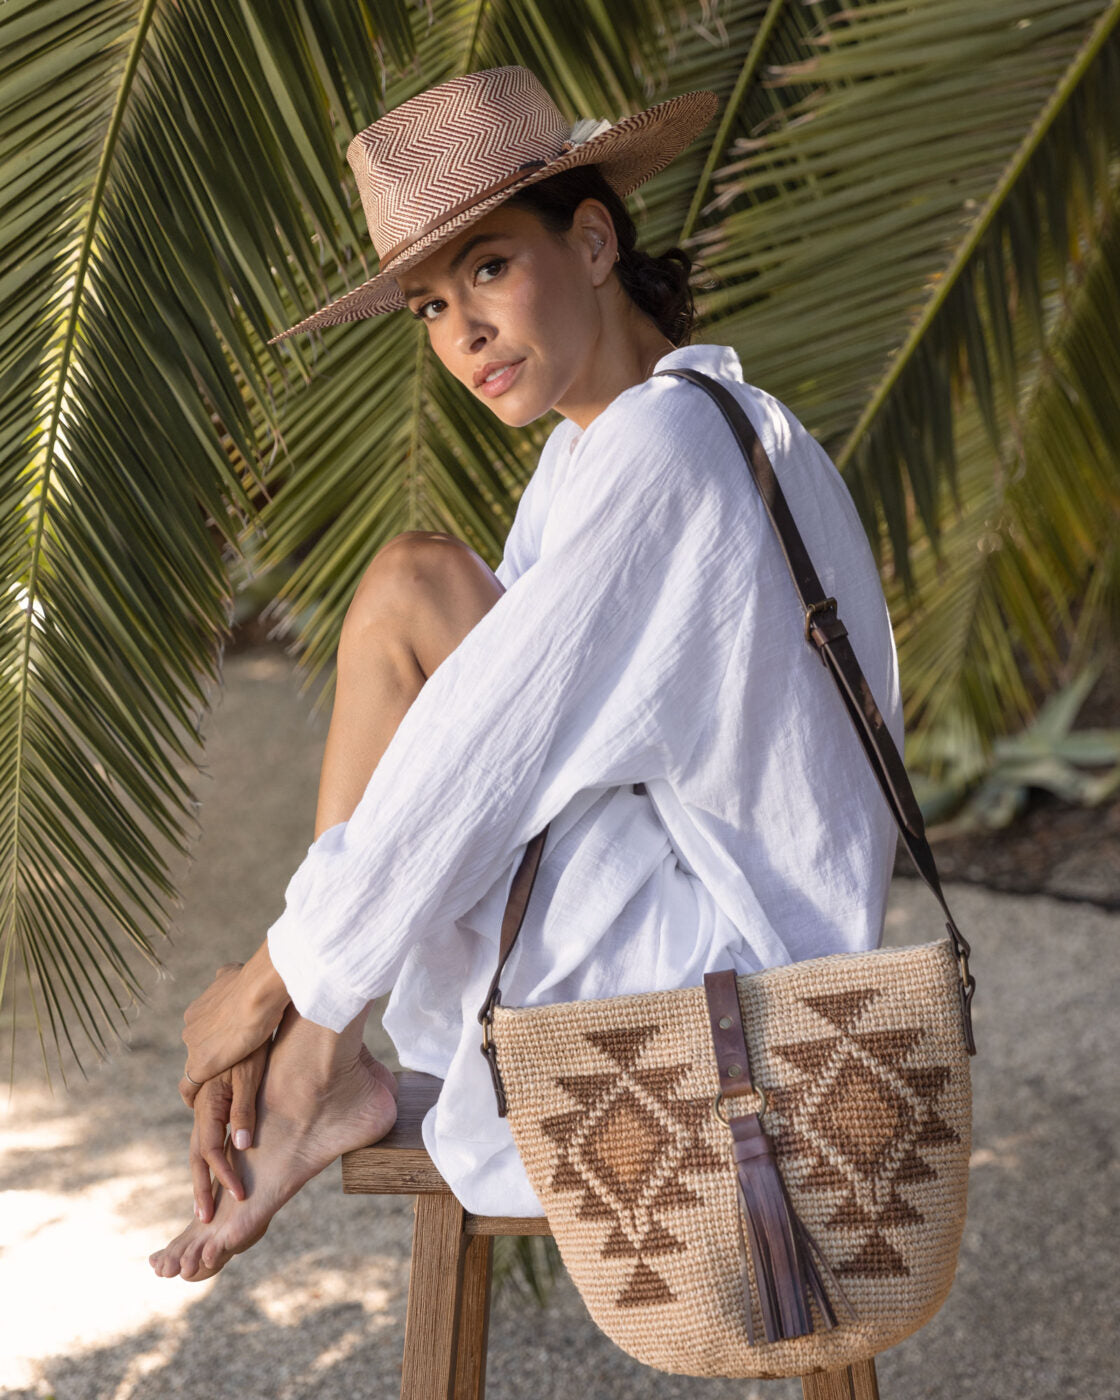 A woman sits on a wooden stool outdoors, wearing a white blouse, a straw hat (Emery XLong Brim by Ninakuru), and carrying a large woven bag with geometric designs. Tropical palm leaves form the backdrop.